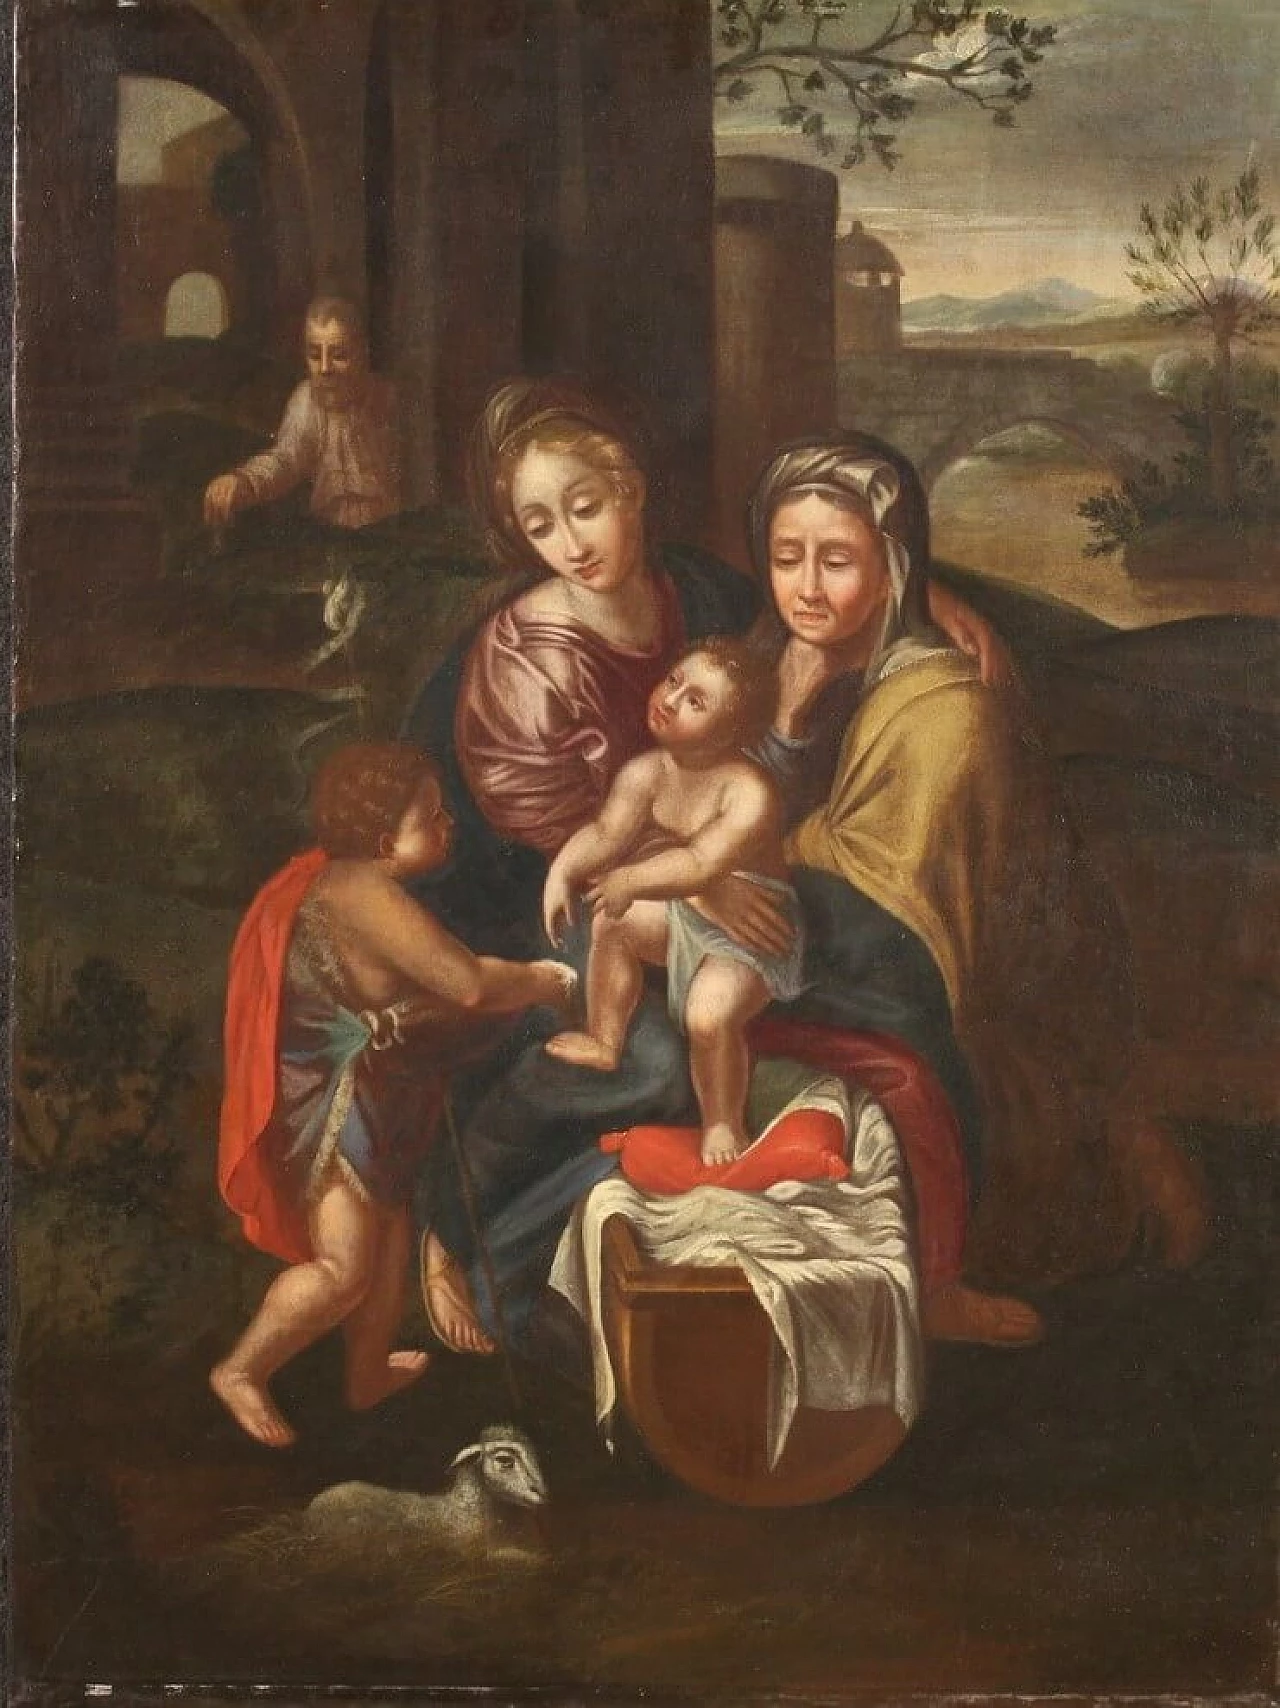 Oil on canvas depicting Holy Family, 17th century 13